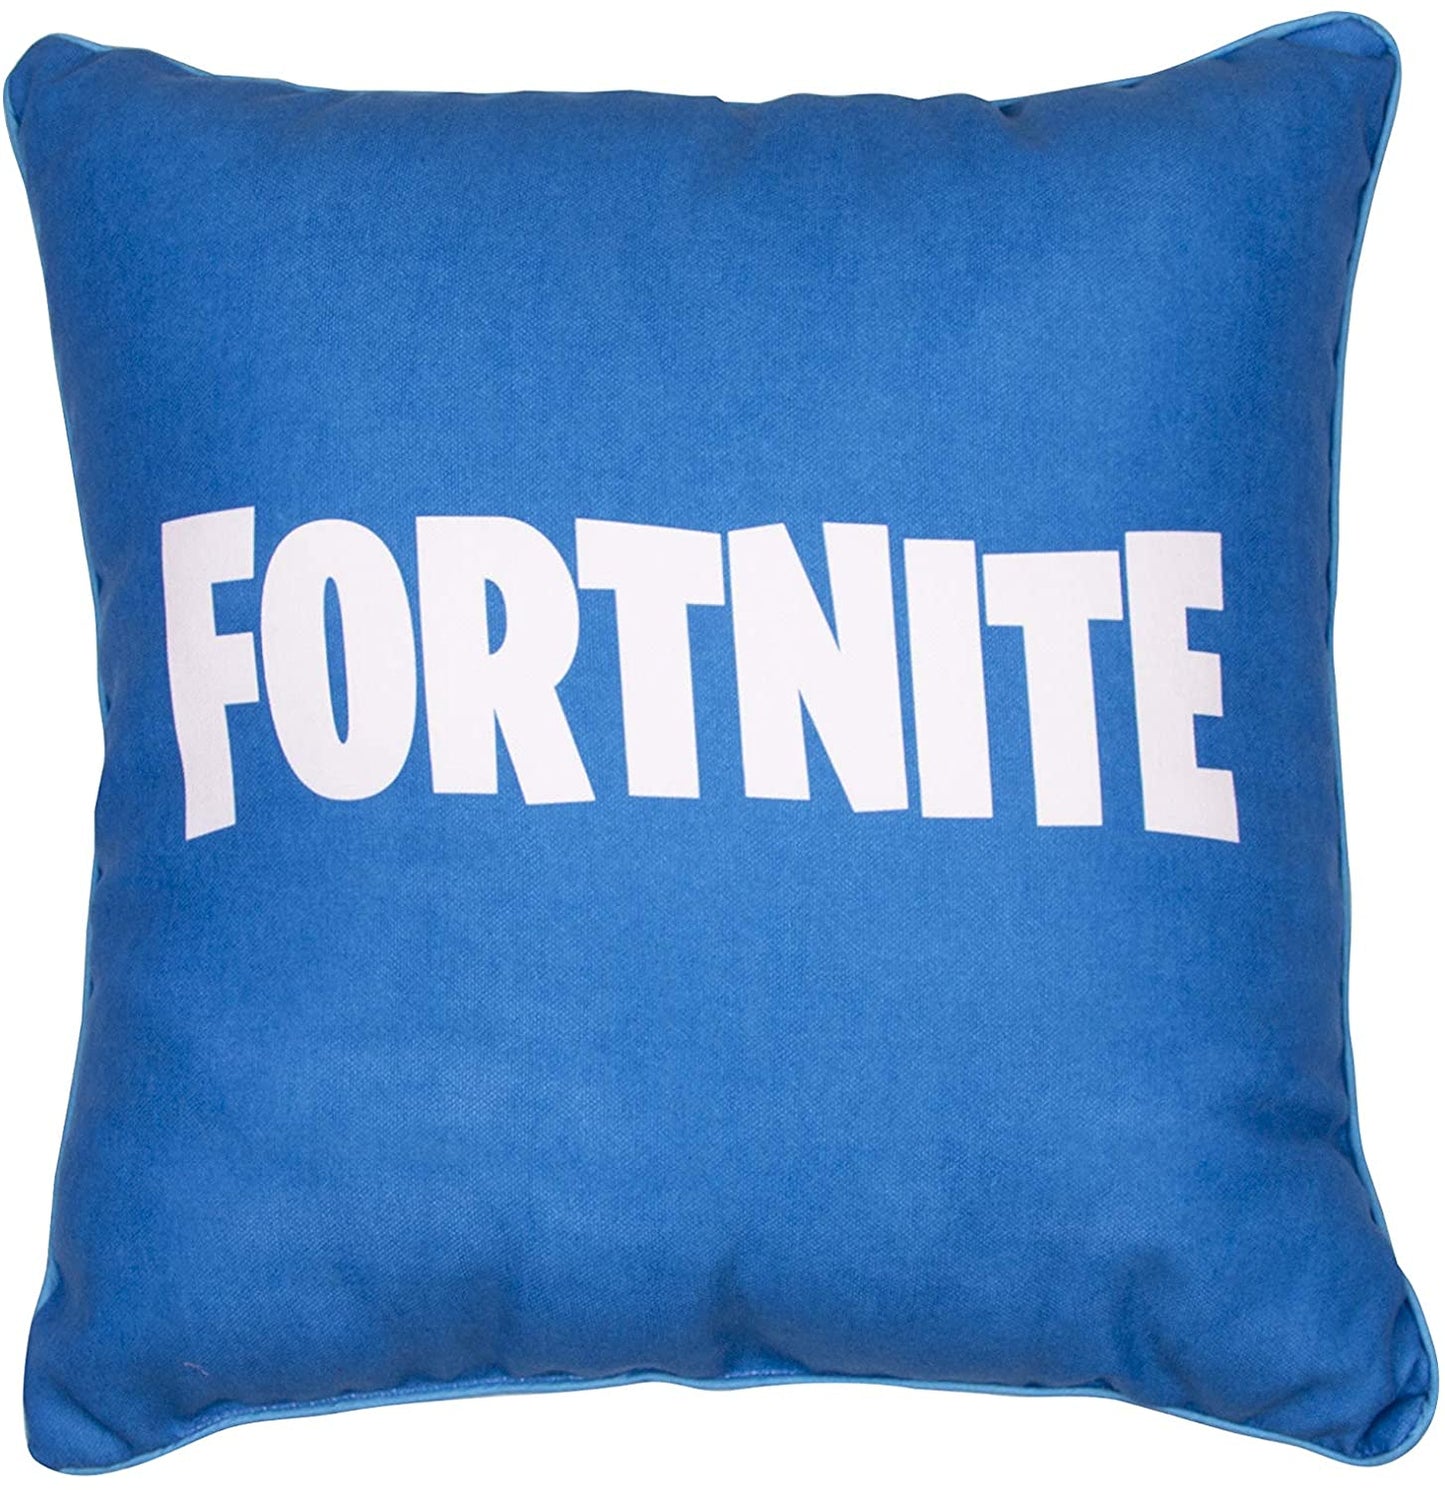 Fortnite Official Filled Decorative Scatter Cushion